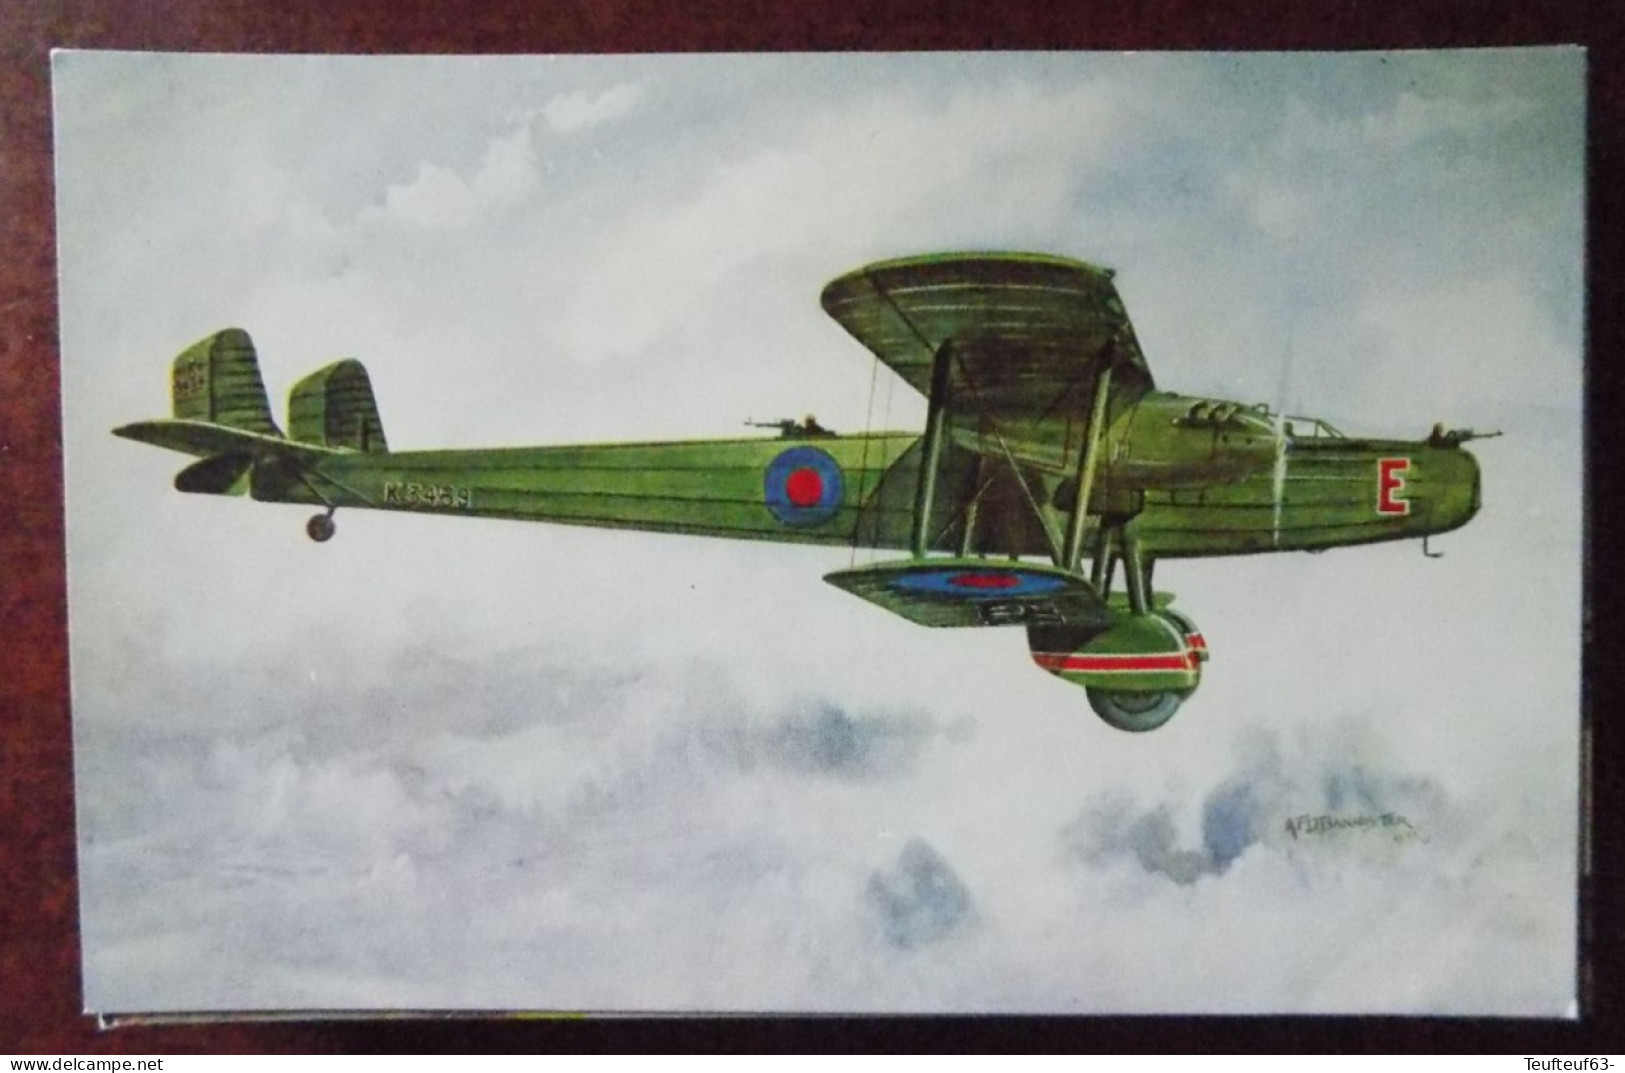 Cpa Handley Page " Heyford " - Long Range Night Bomber  - Ill. Bannister - 1919-1938